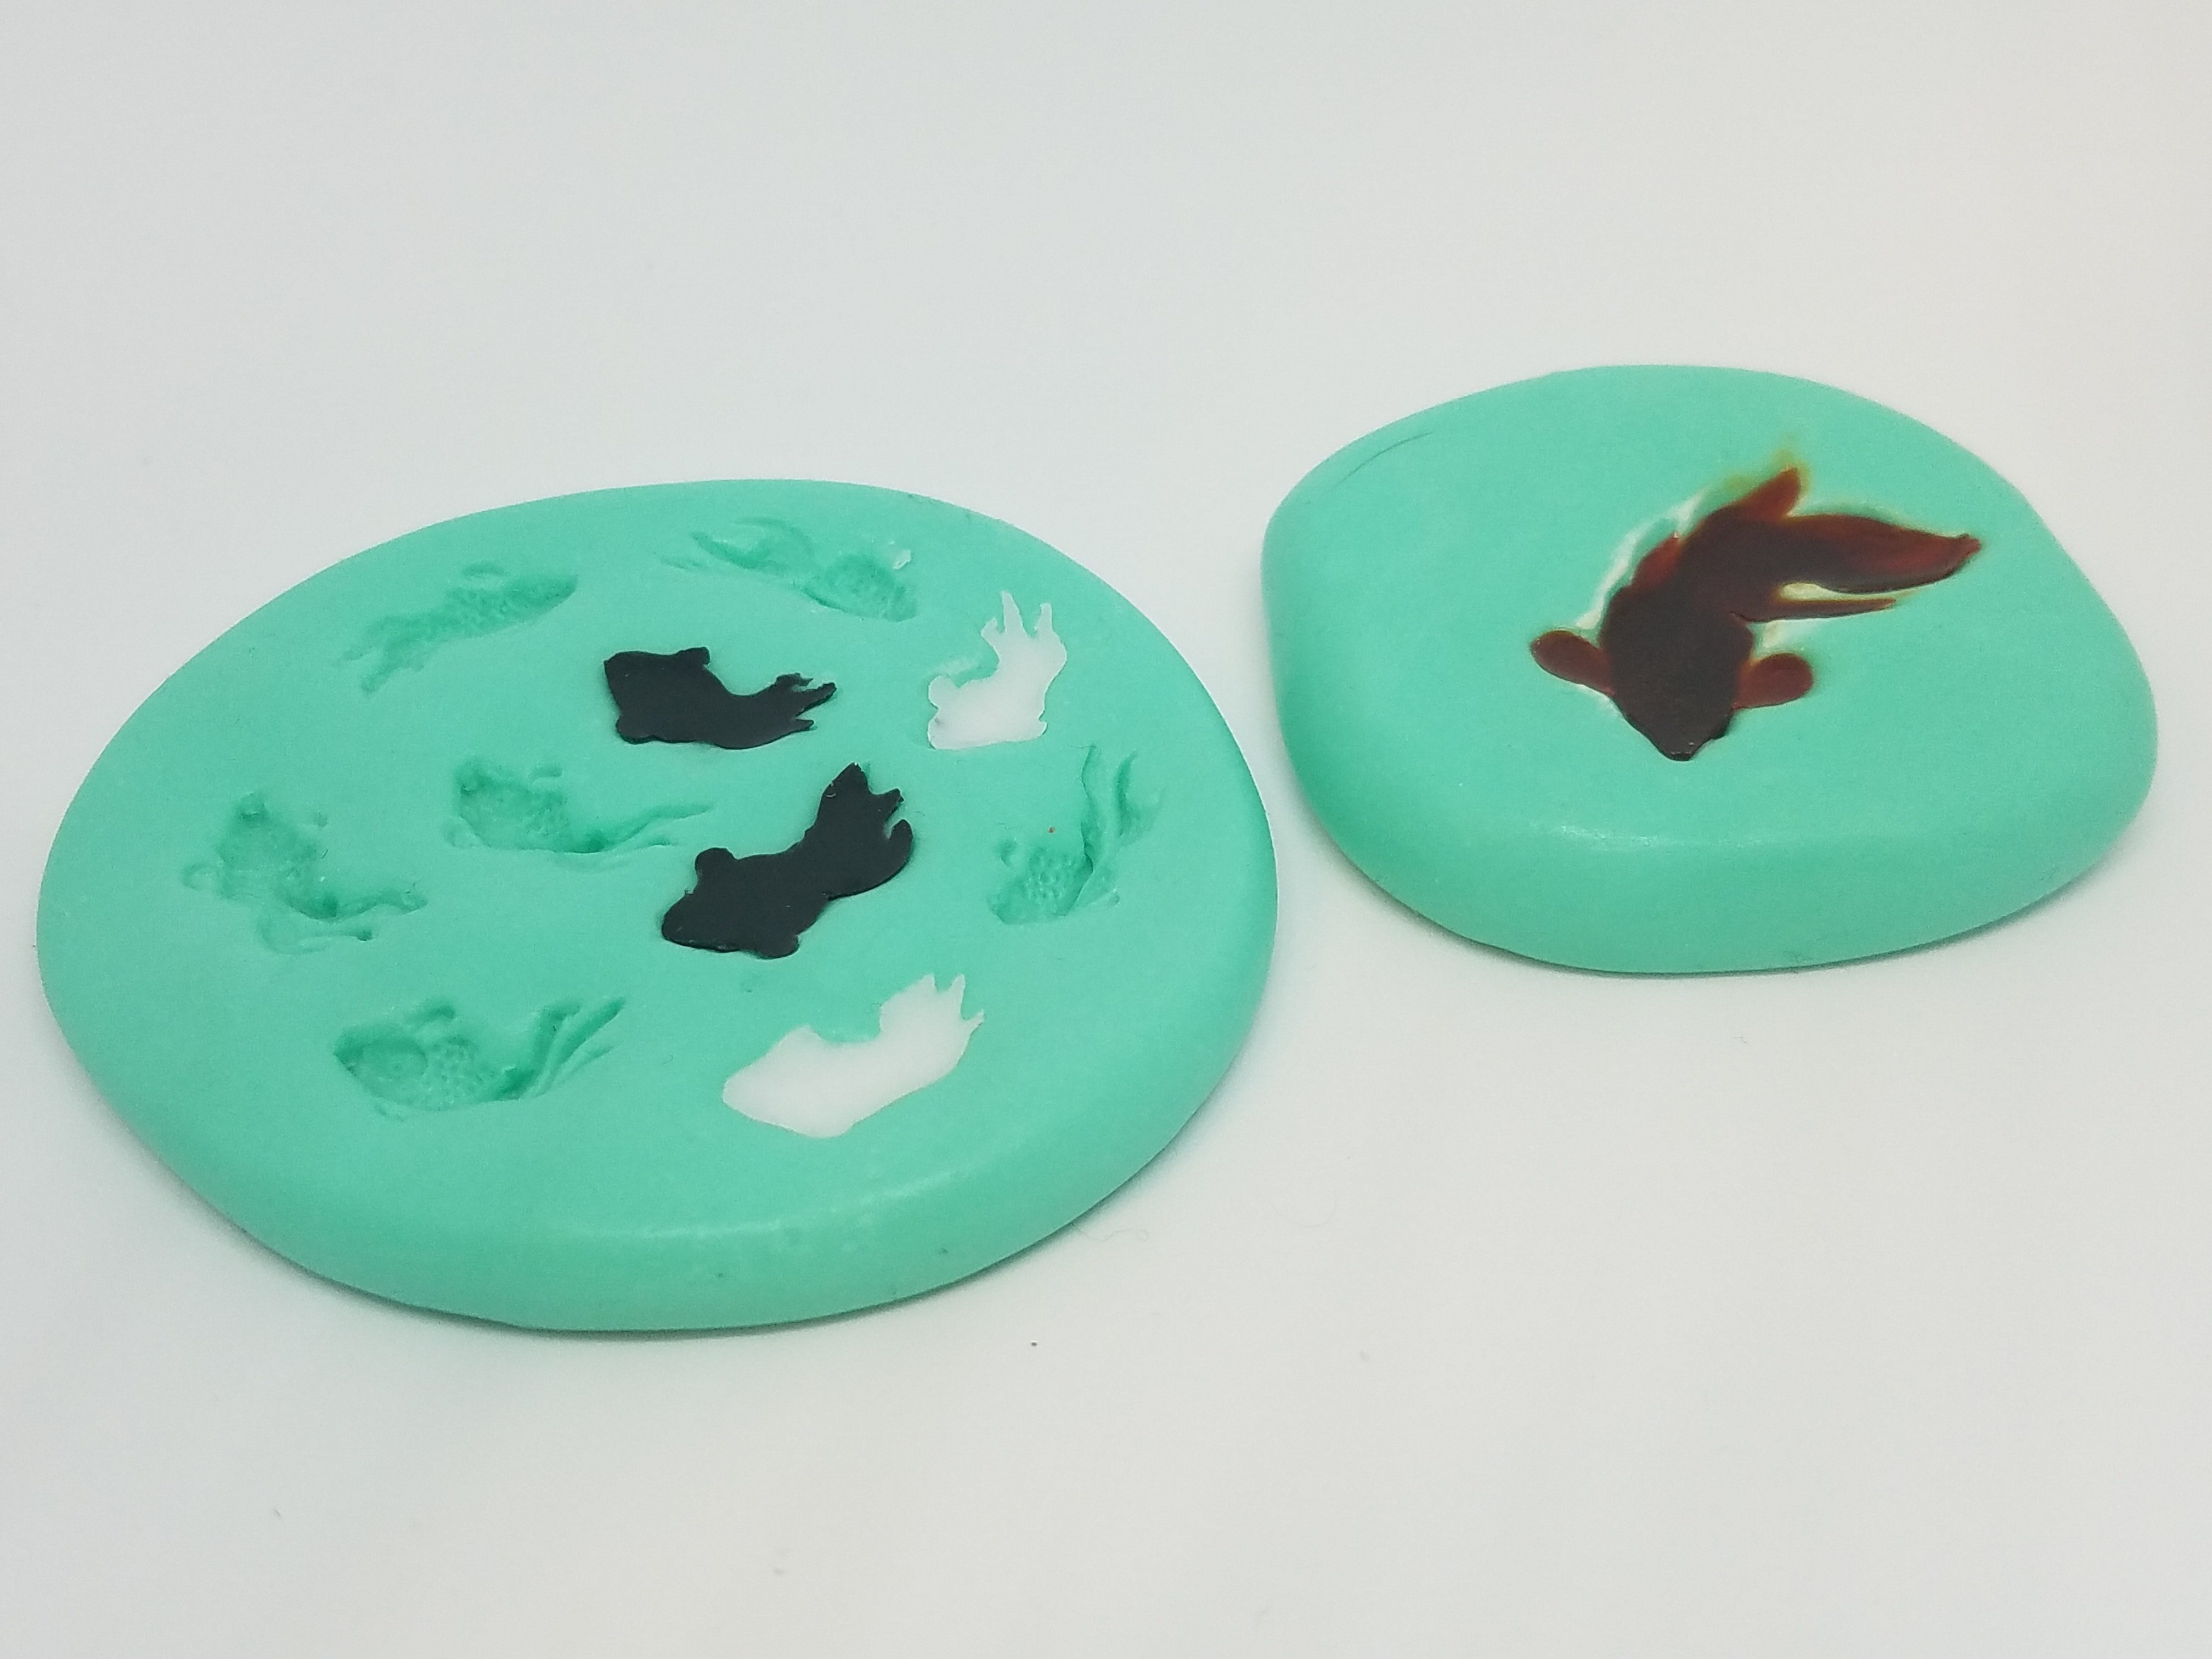 Two green koi molds filled with white, black, and orange resin